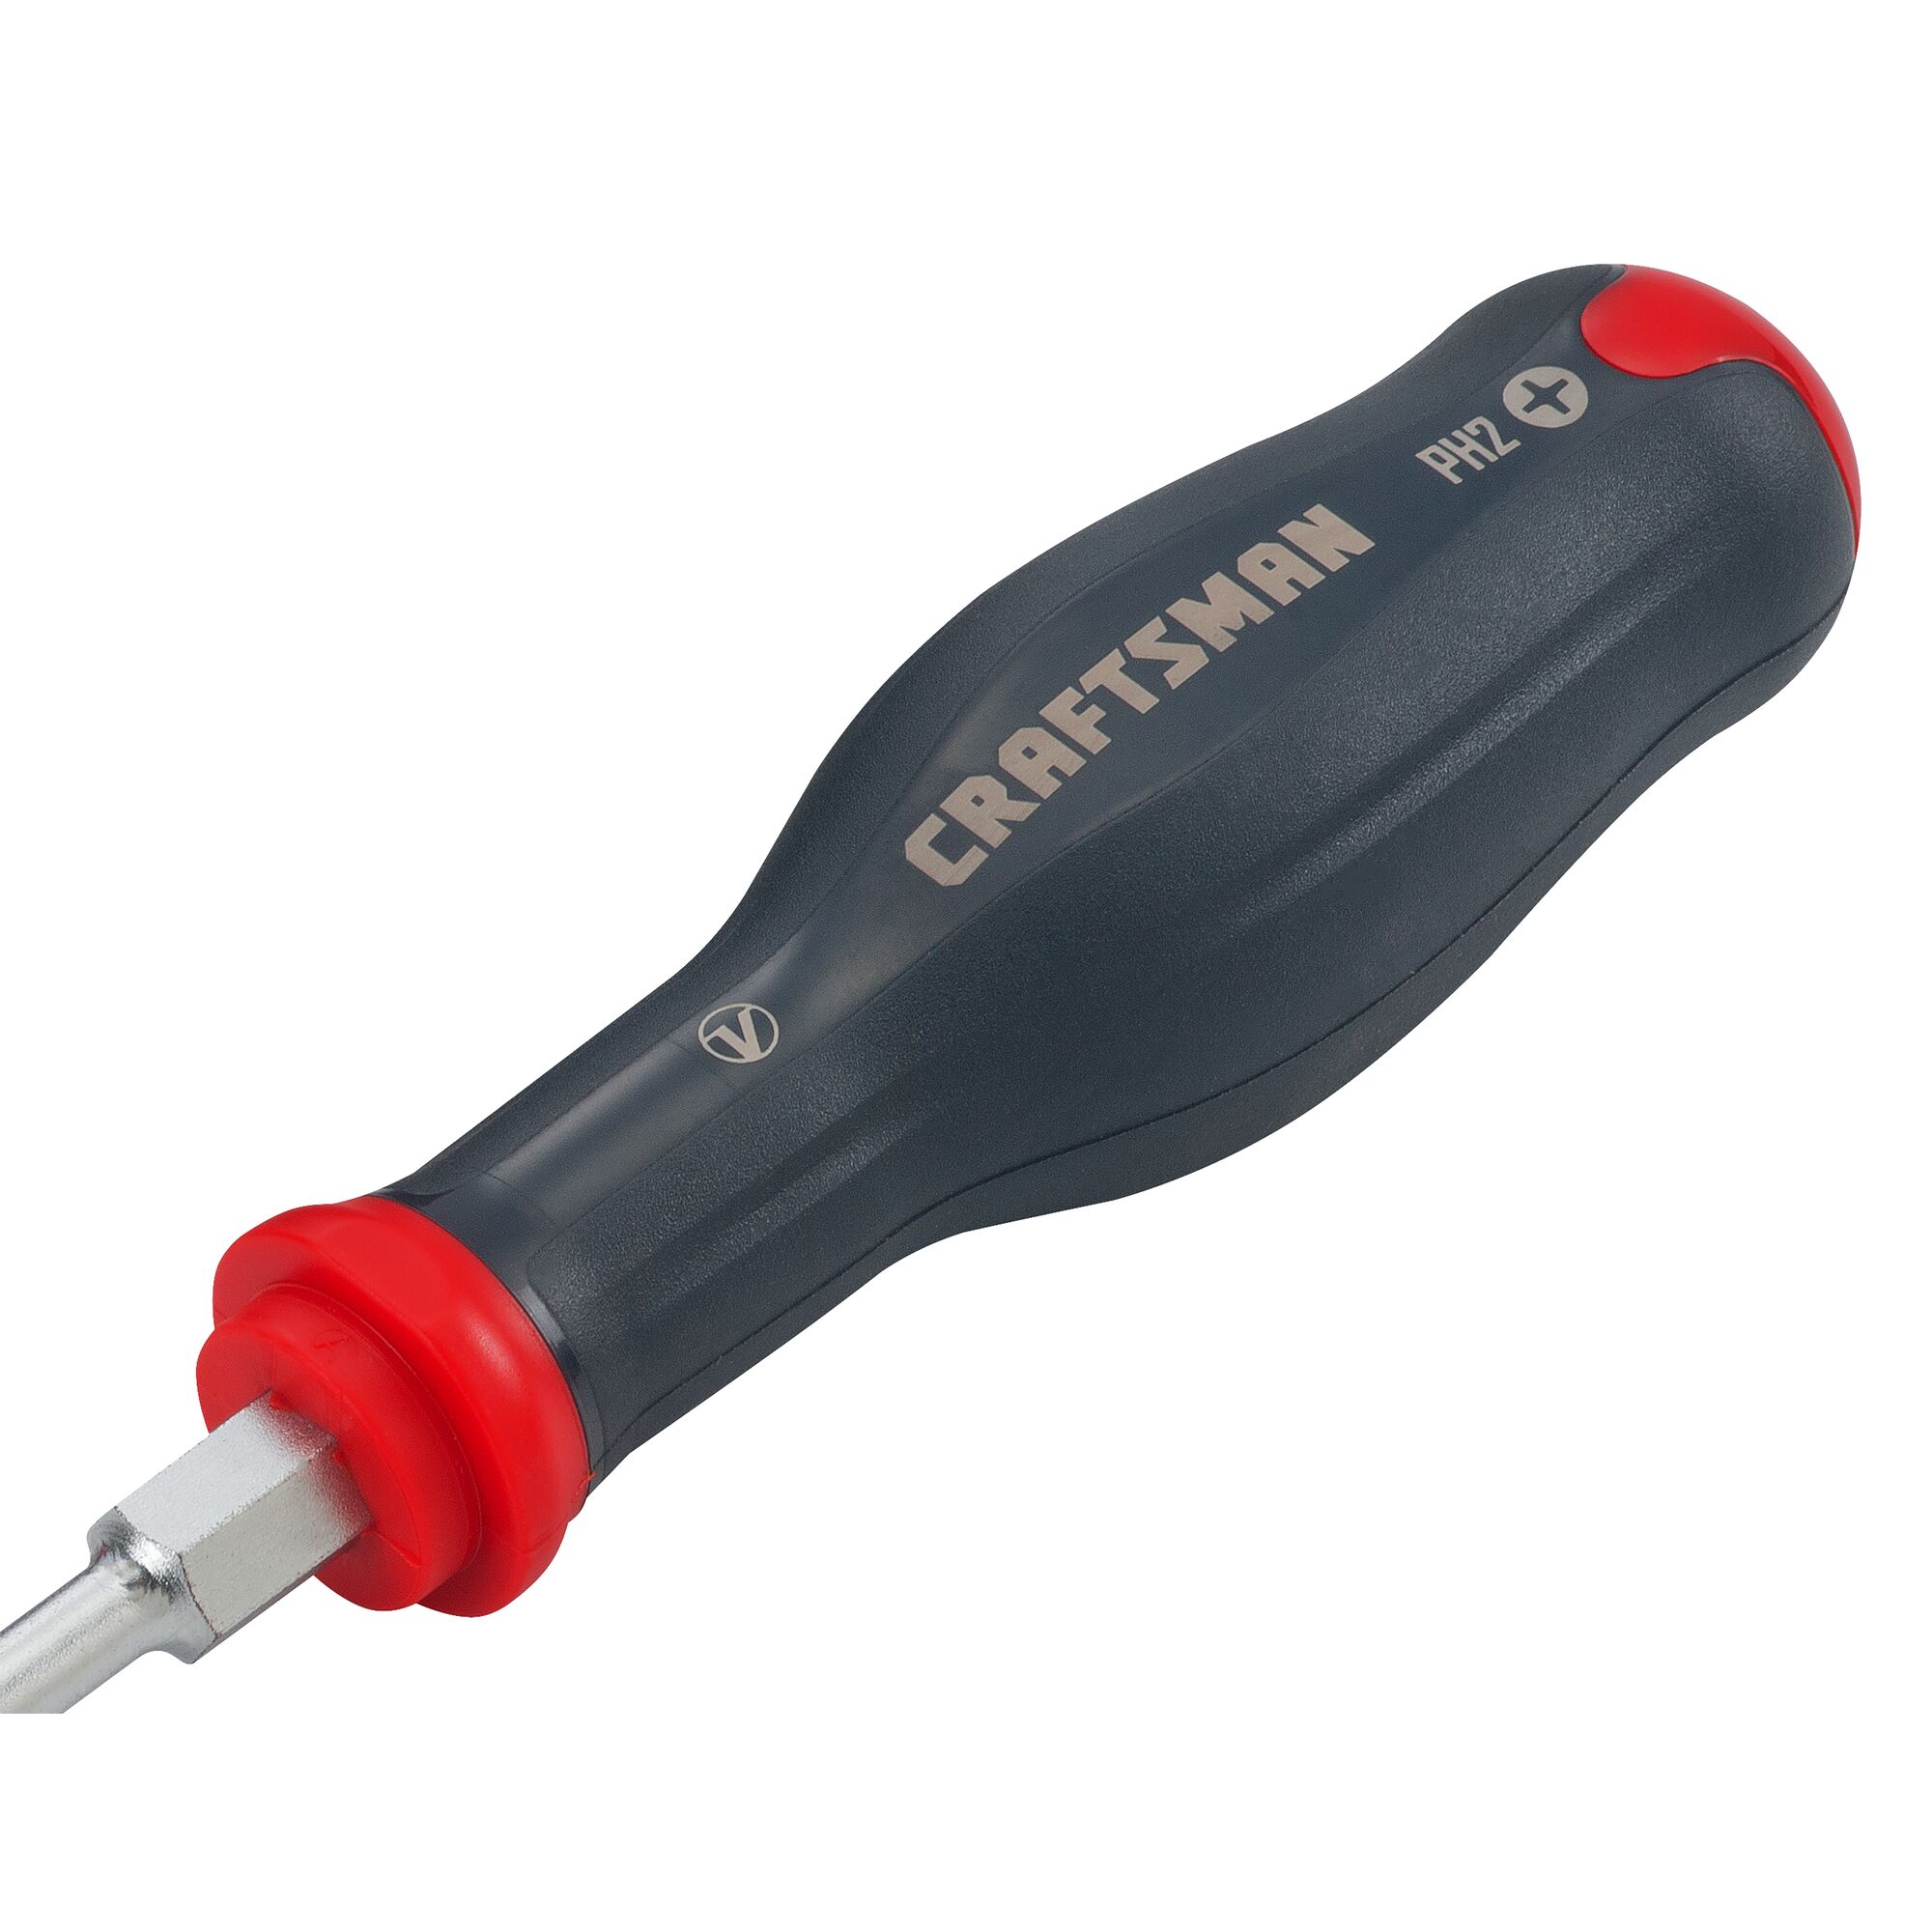 View of CRAFTSMAN Screwdrivers: Set highlighting product features